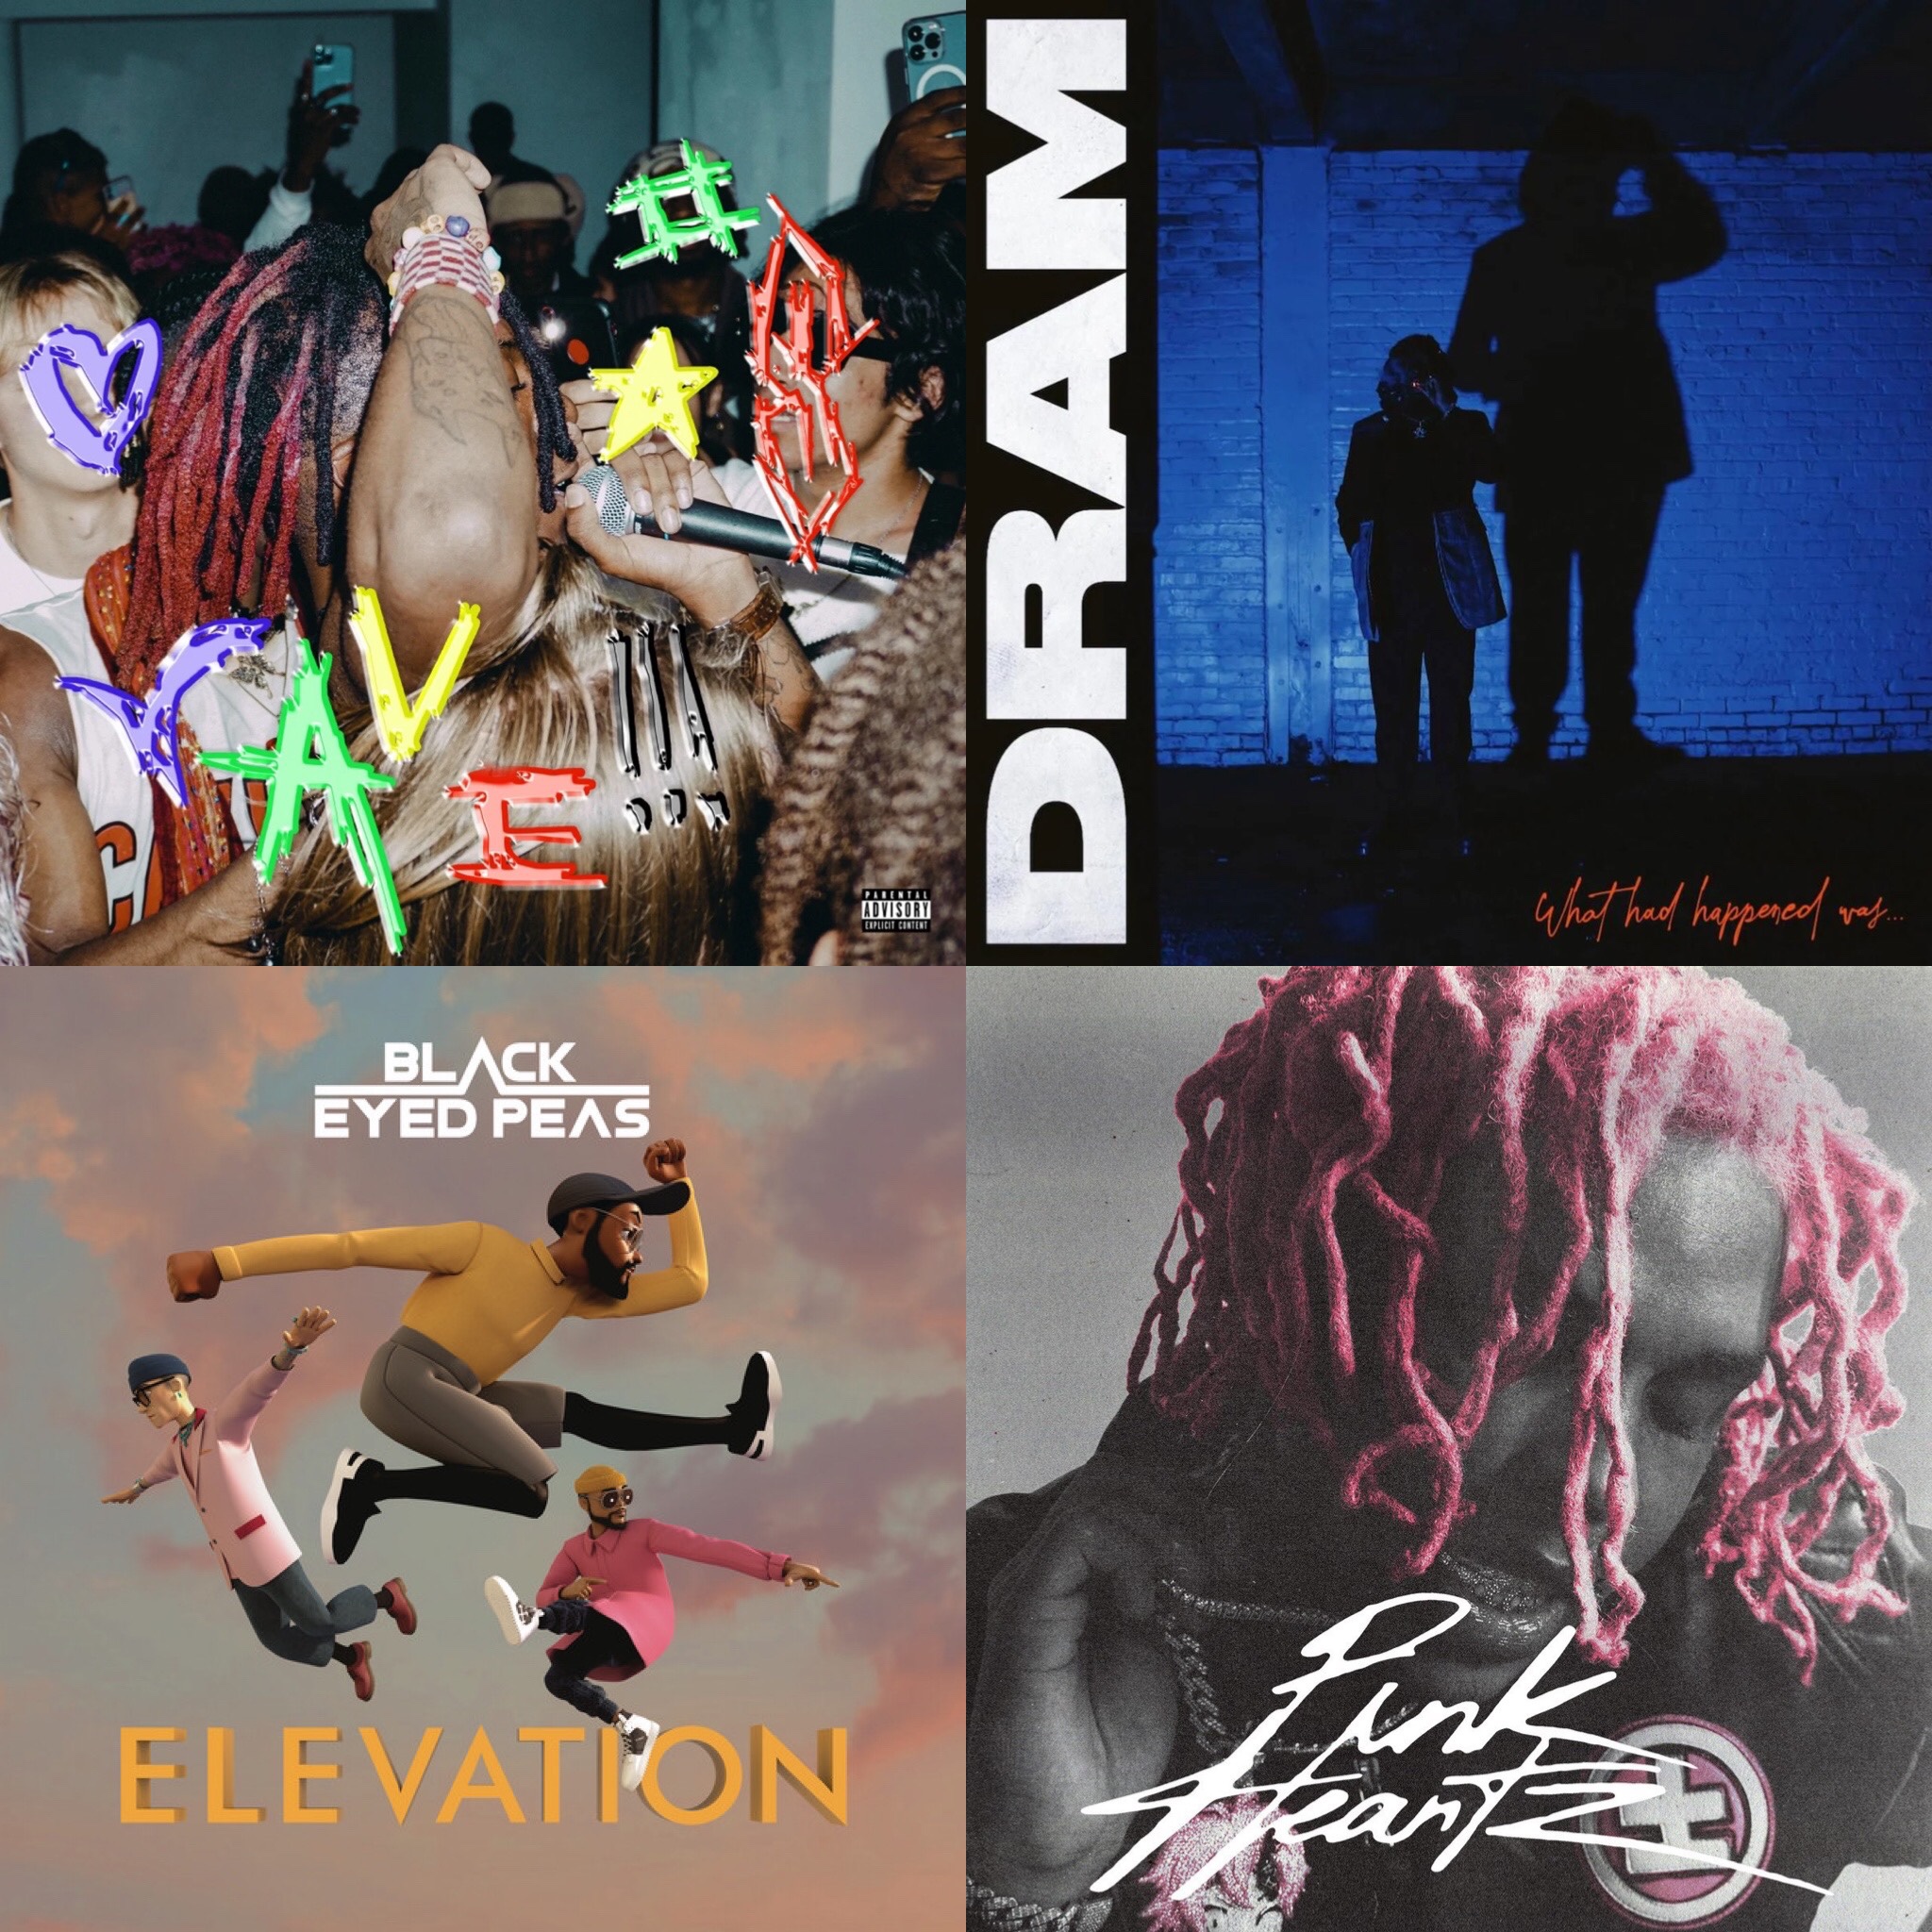 ICYMI: Top Five Underrated Albums From Last Week (11/11): GASHI, SoFaygo, DRAM, and More